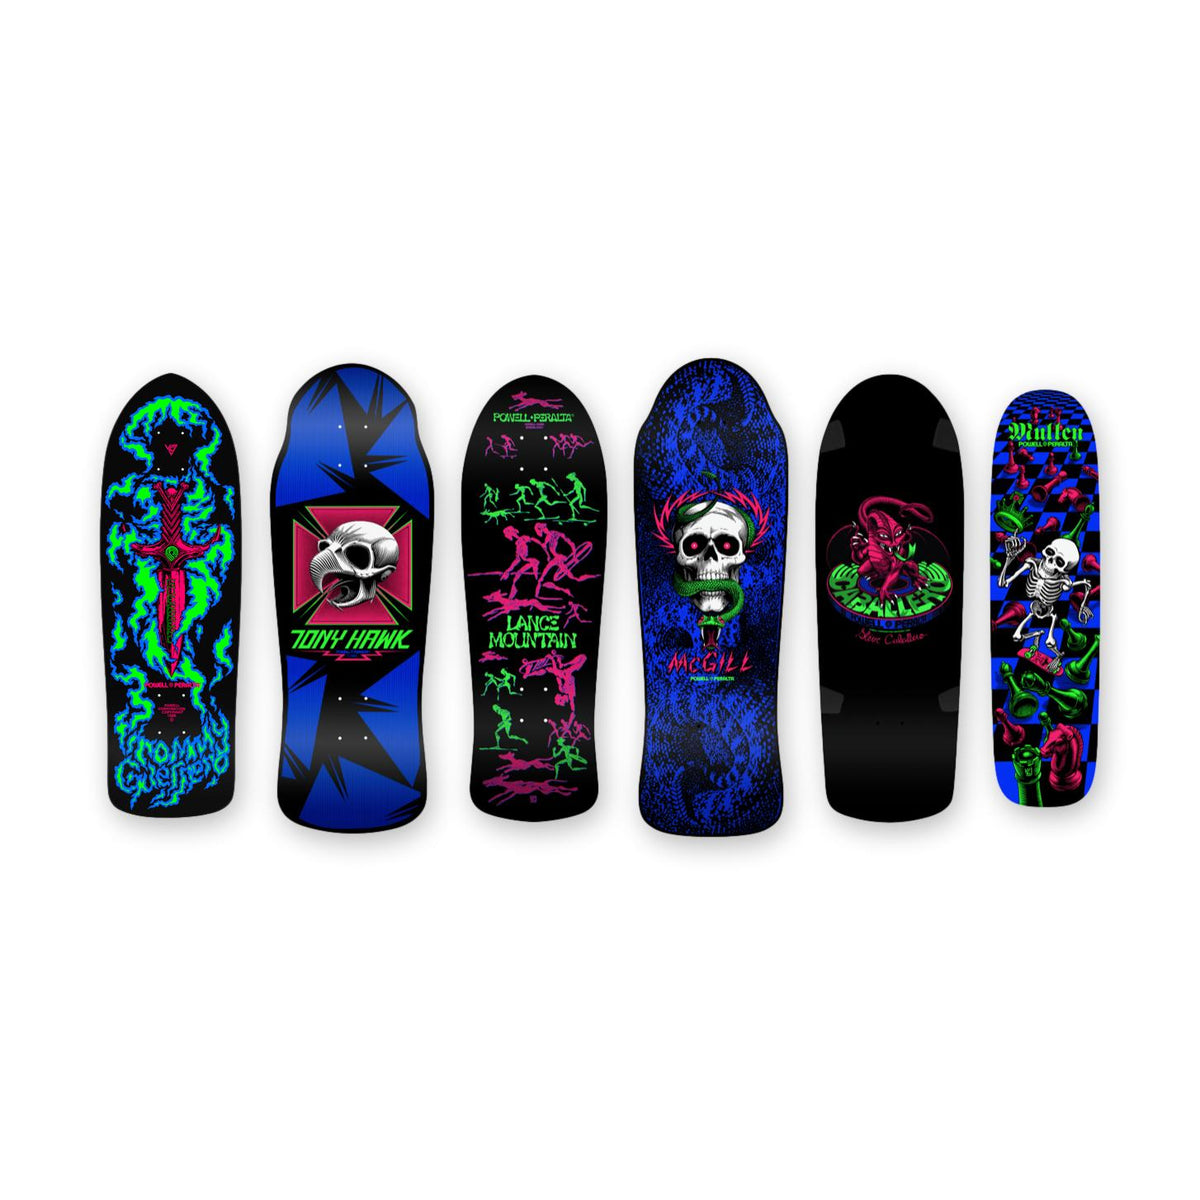 Powell-Peralta Re-Issue Limited Skateboard Decks, Series 14, Entire Collection